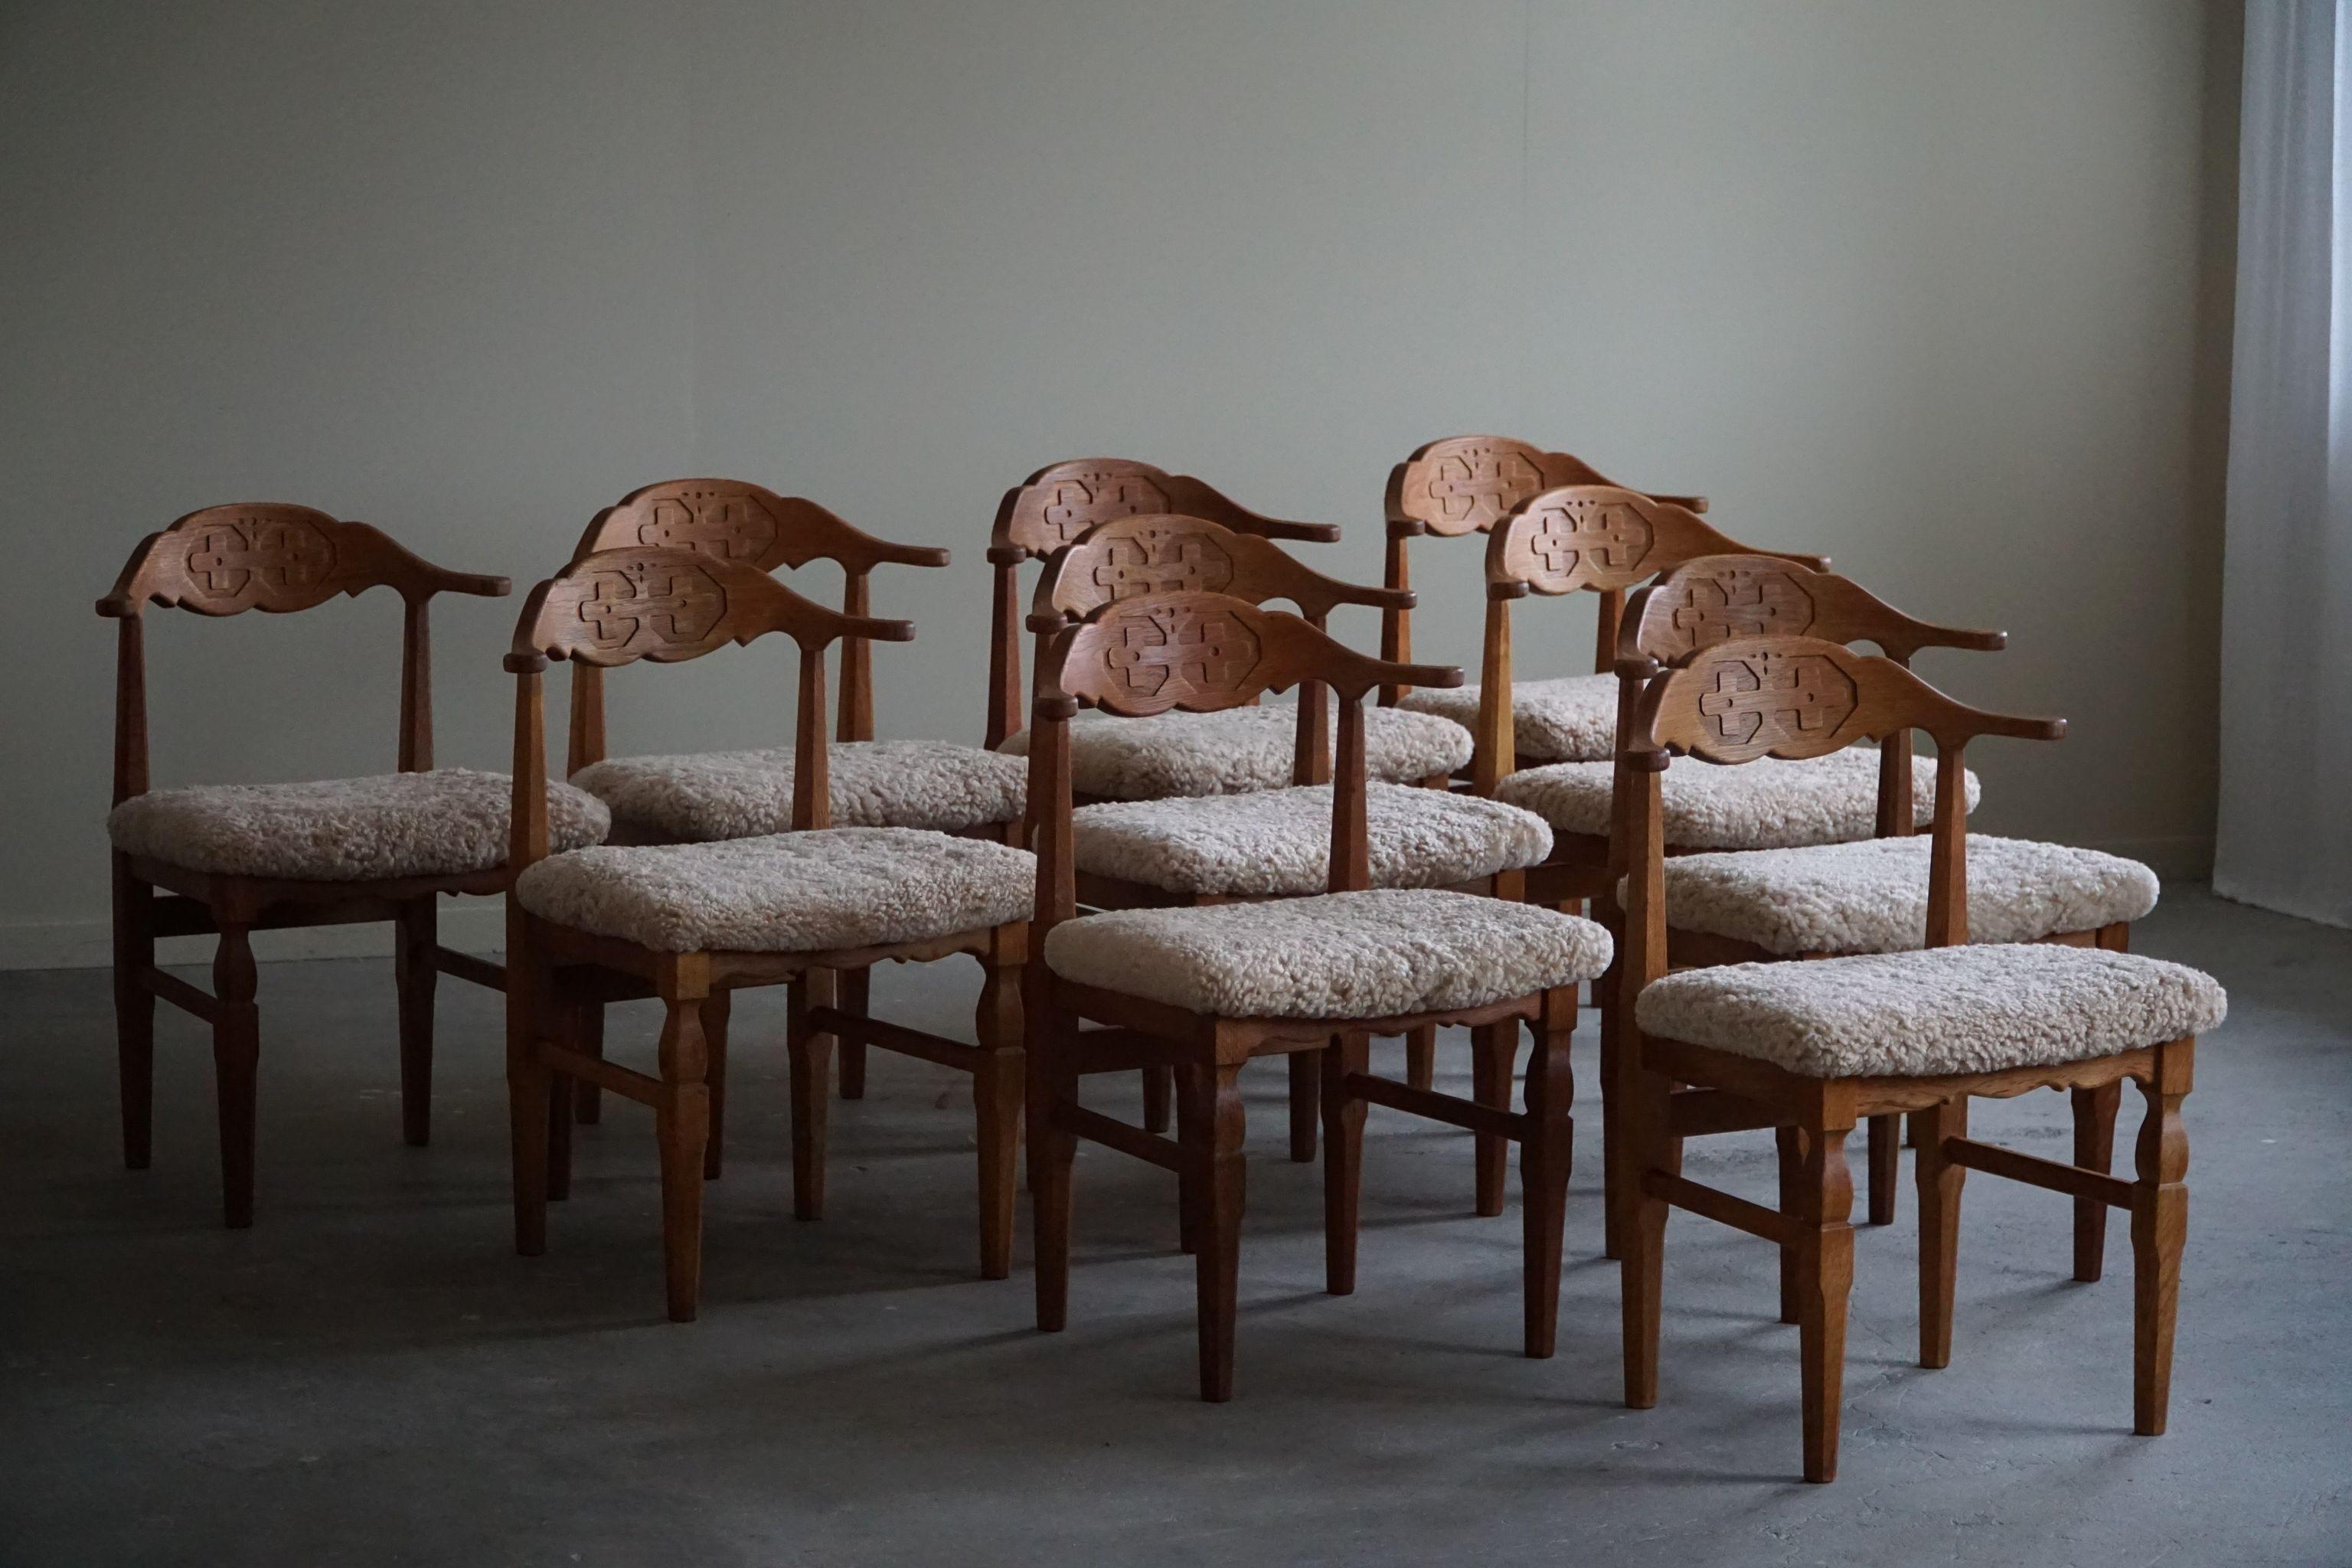 Such a magnificent set of 10 dining chairs in oak, seats reupholstered in a great quality shearling lambswool. 
Designed by Henning Kjærnulf for E.G. Møbler - made in the 1960s.

The overall impression of these mid century chairs are really